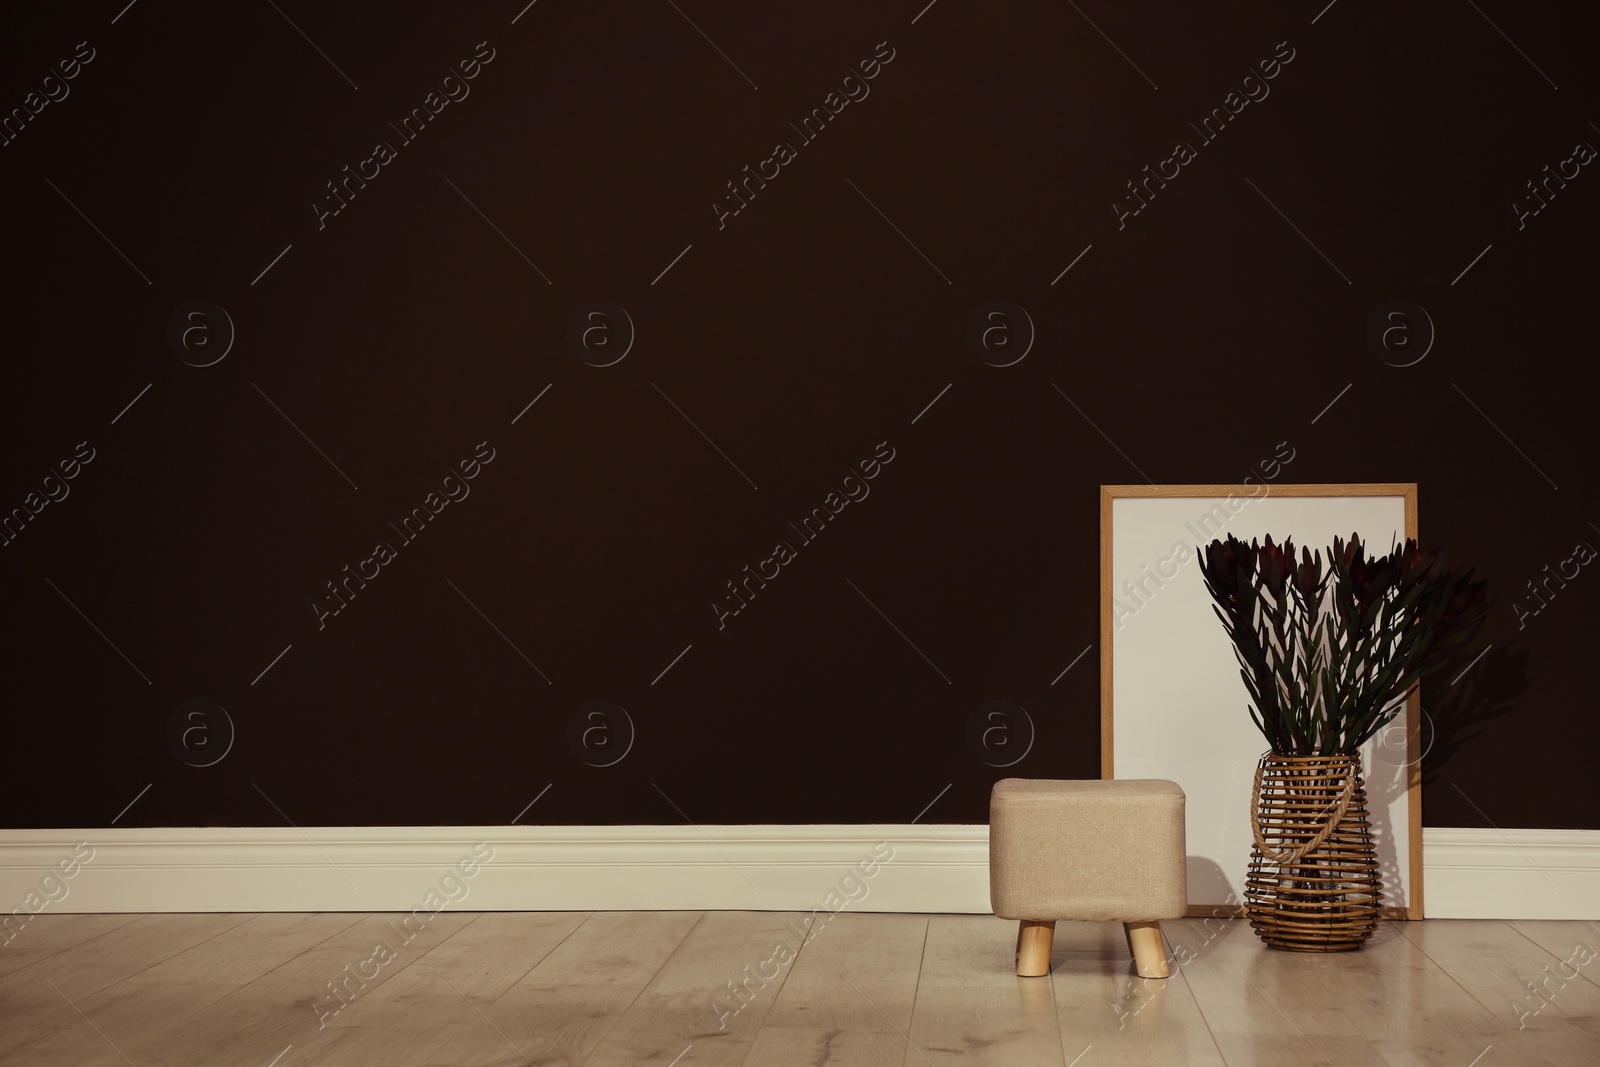 Photo of Stylish beige pouf, poster and decorative flowers near brown wall in room. Space for text